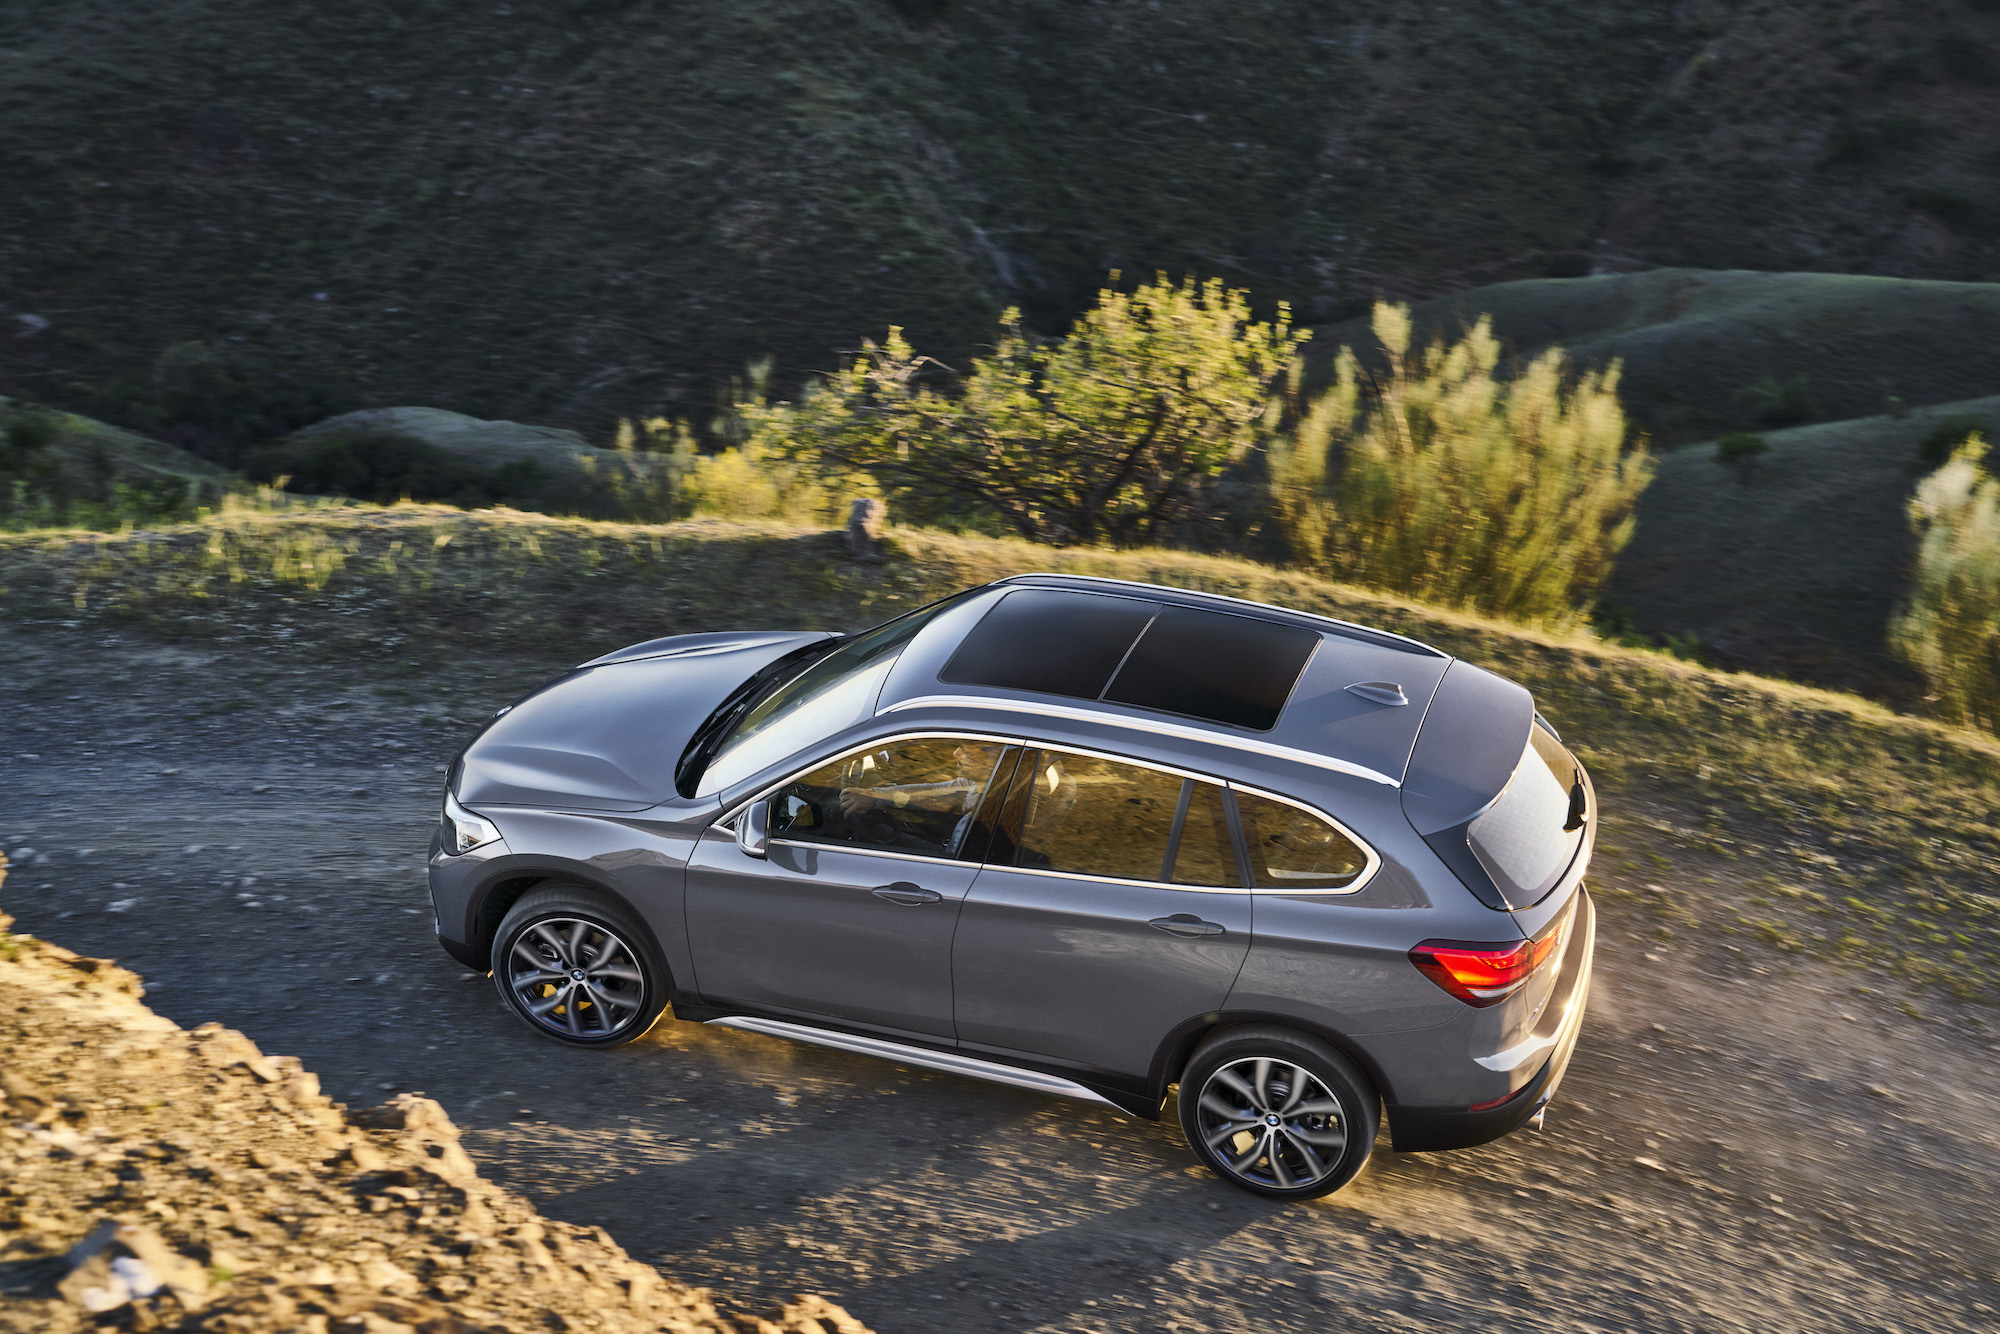 A gray BMW X1 luxury SUV travels on a dirt road on a mountain